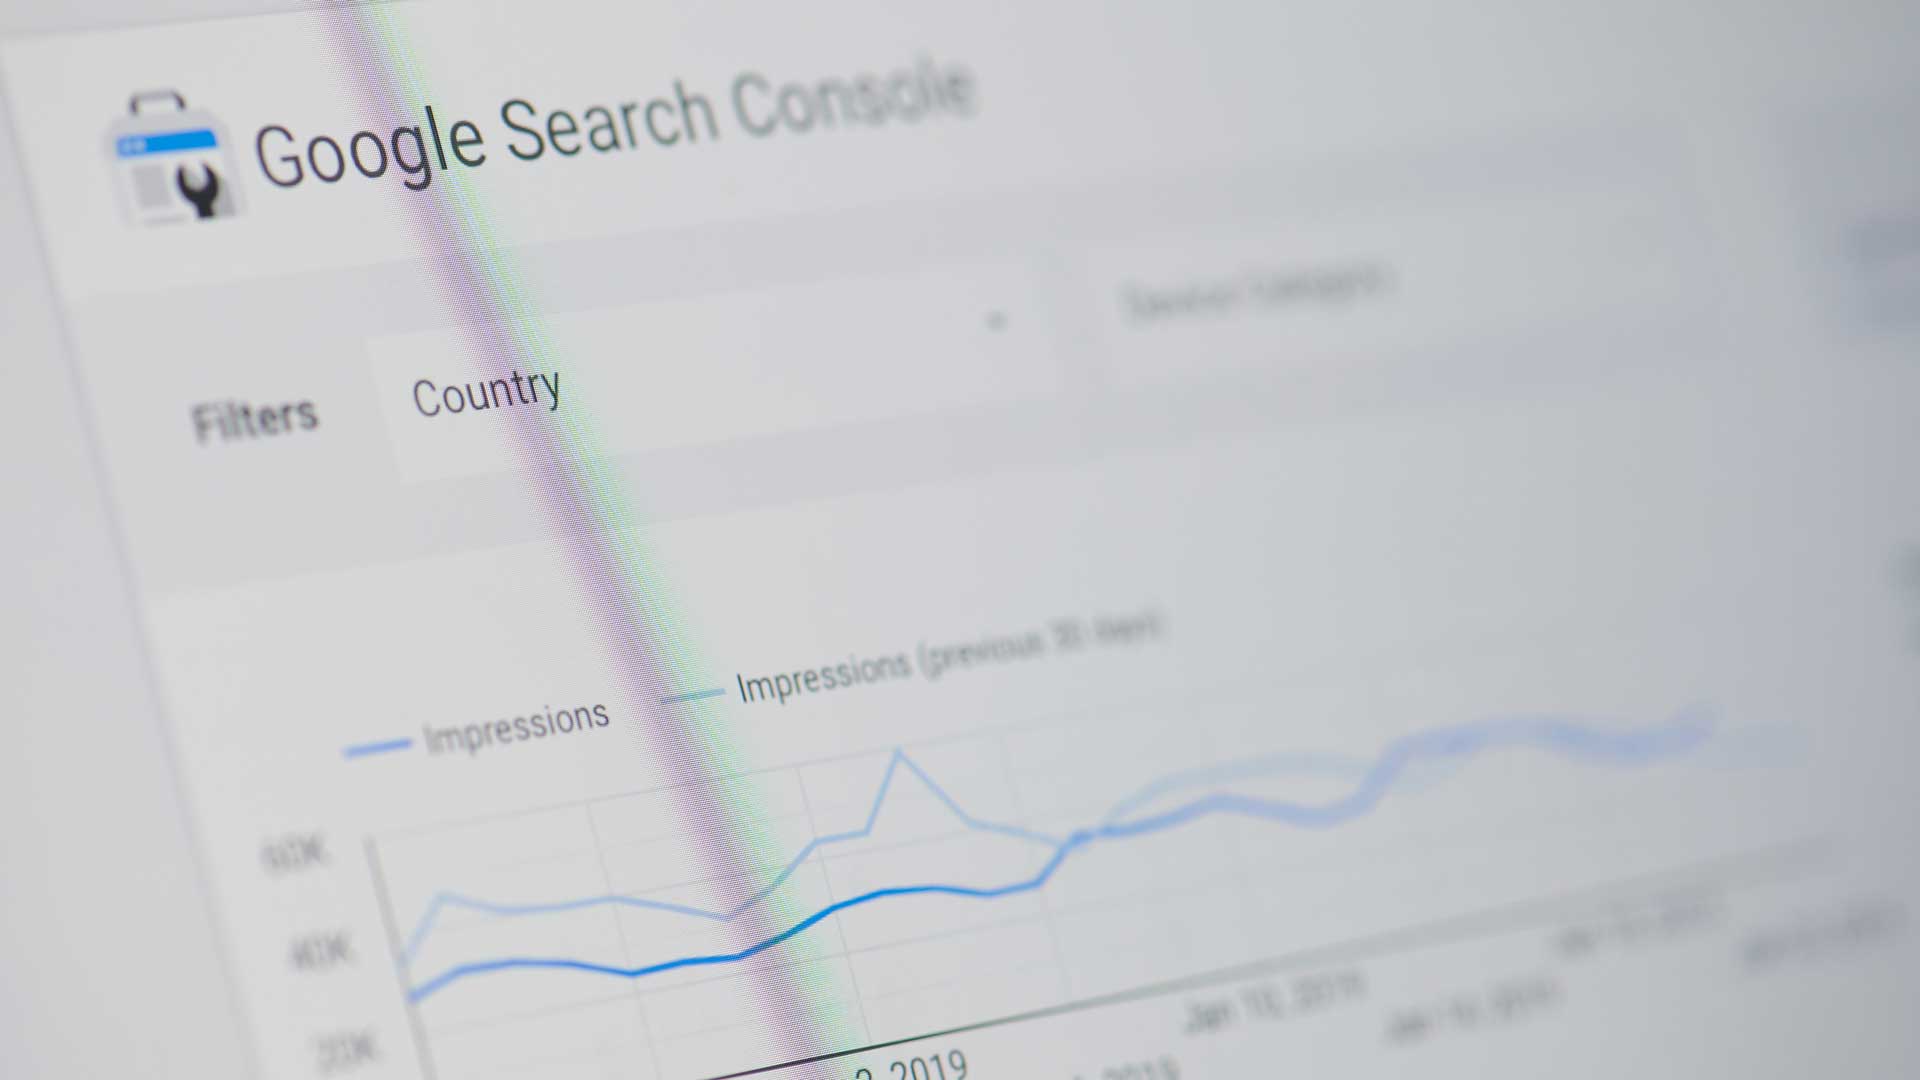 Google Search Console adds daily bulk data exports to BigQuery